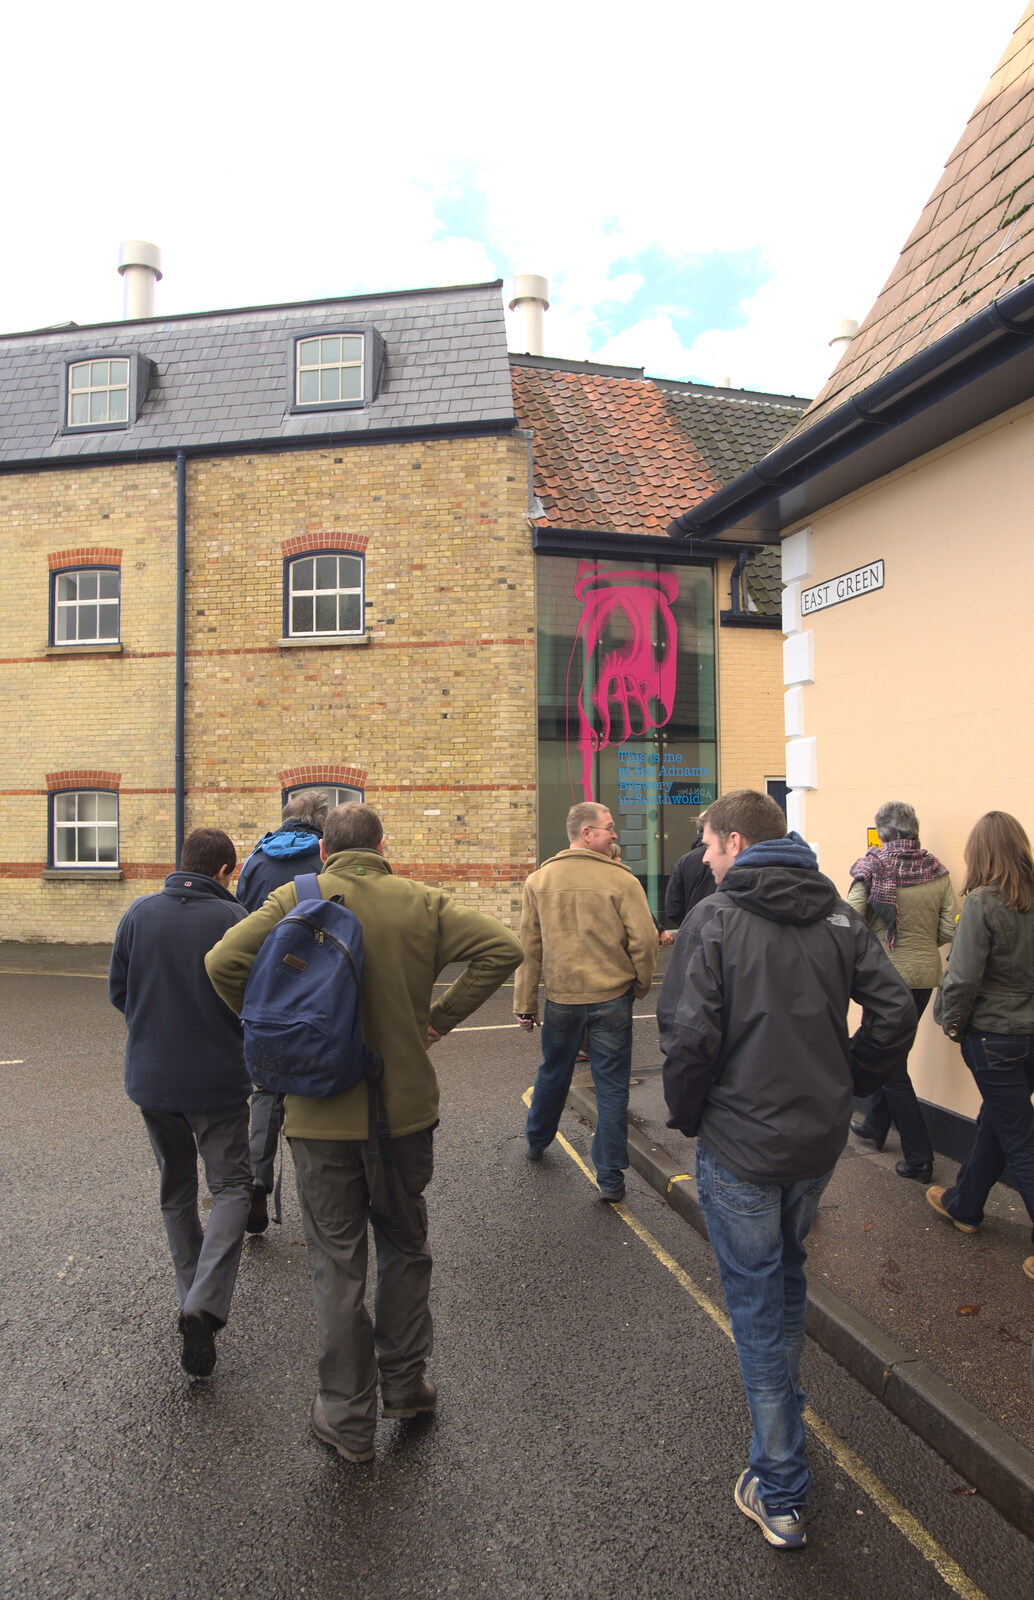 We head off to another building from Apple's Adnams Brewery Birthday Tour, Southwold, Suffolk - 29th November 2012